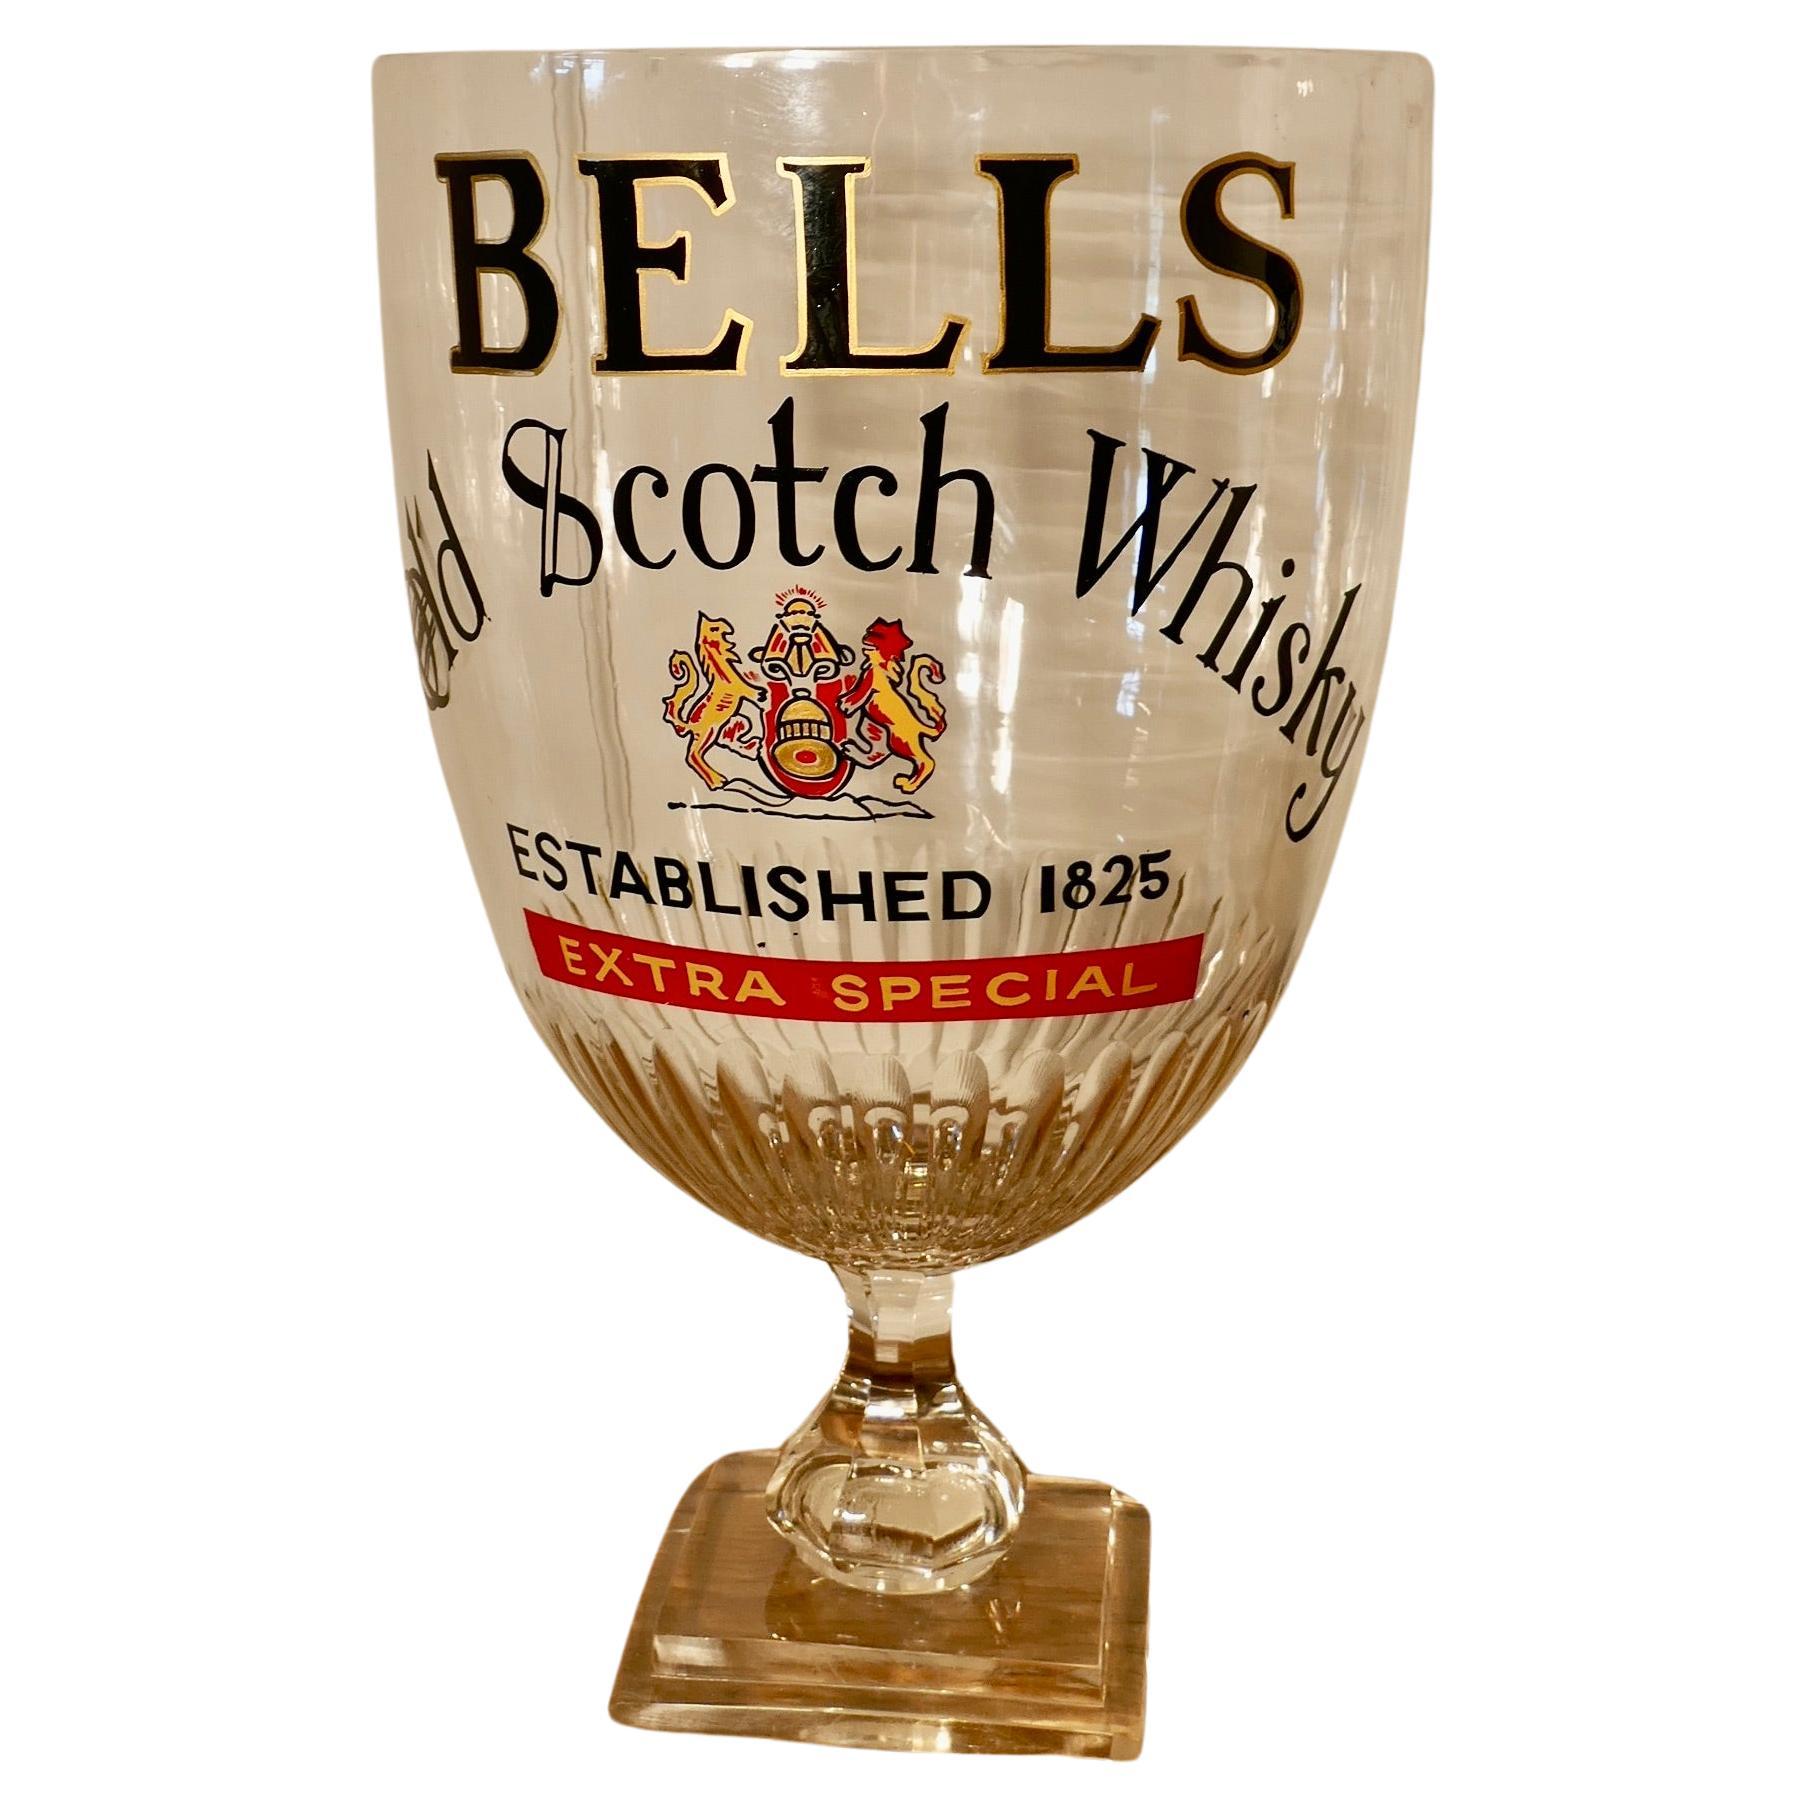 Giant Advertising Presentation Glass Chalice for Bells Scotch Whisky    